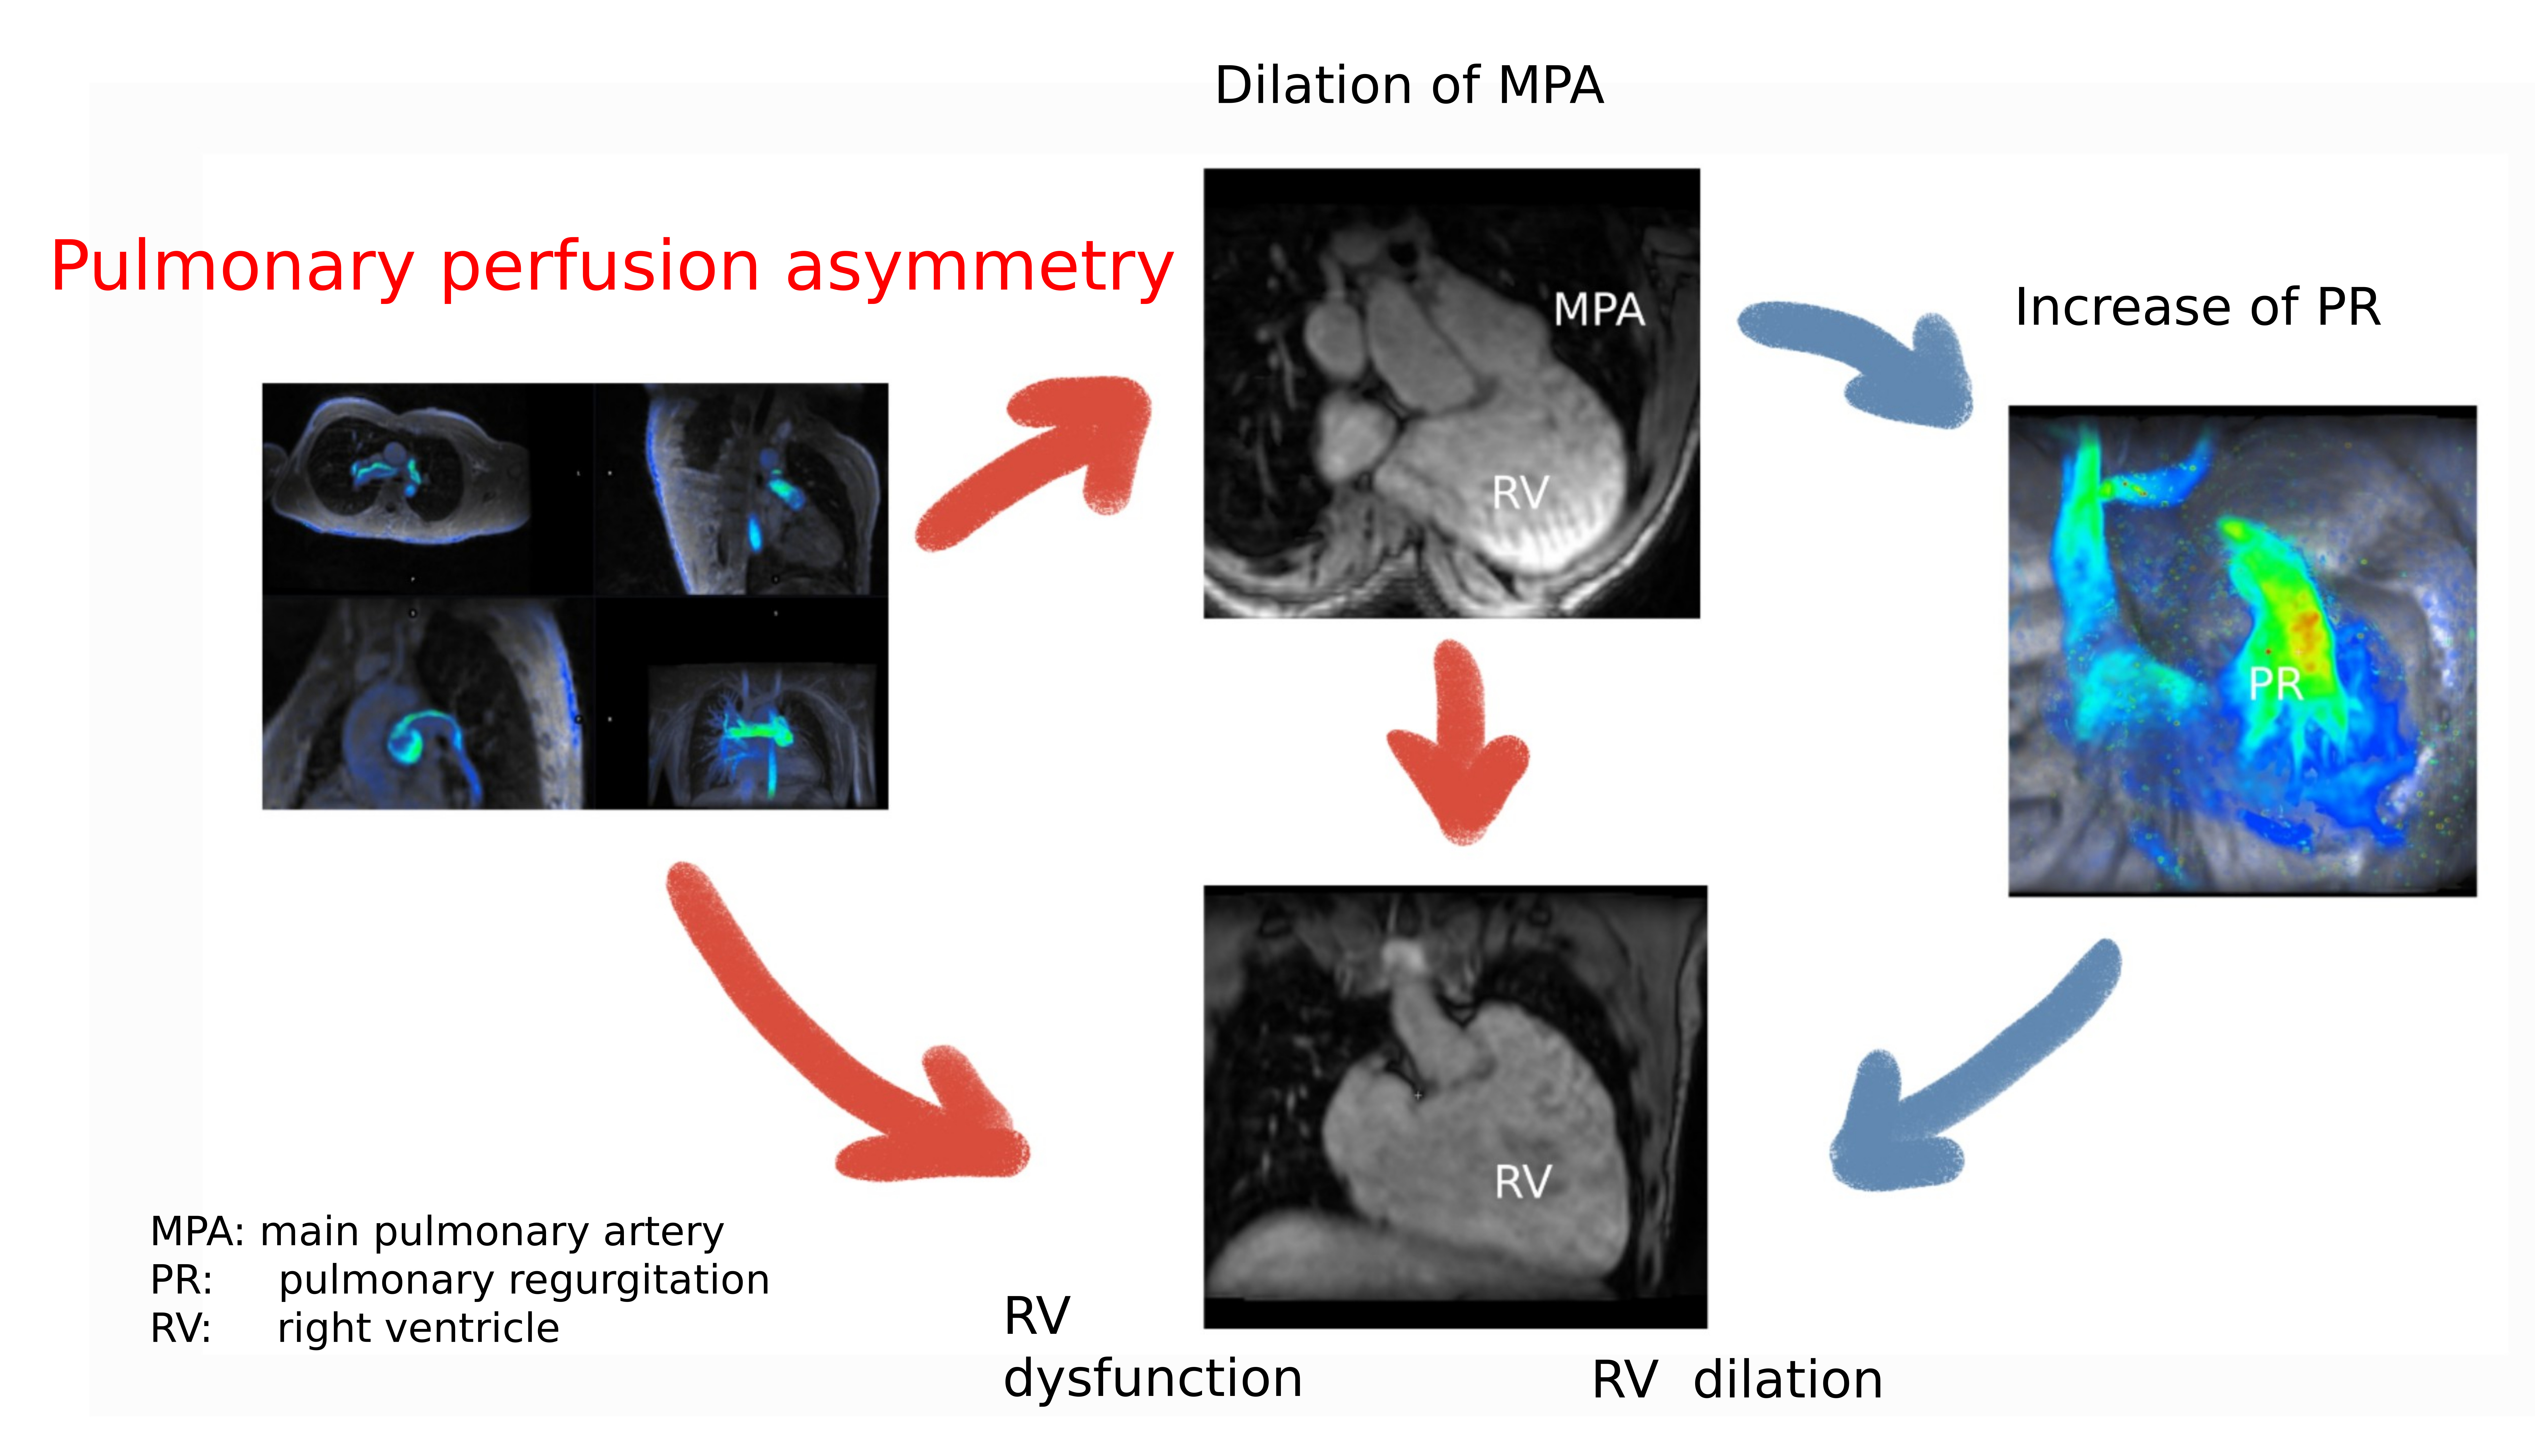 Pulmonary Perfusion Asymmetry in Patients after Repair of Tetralogy of Fallot: A 4D Flow MRI-Based Study